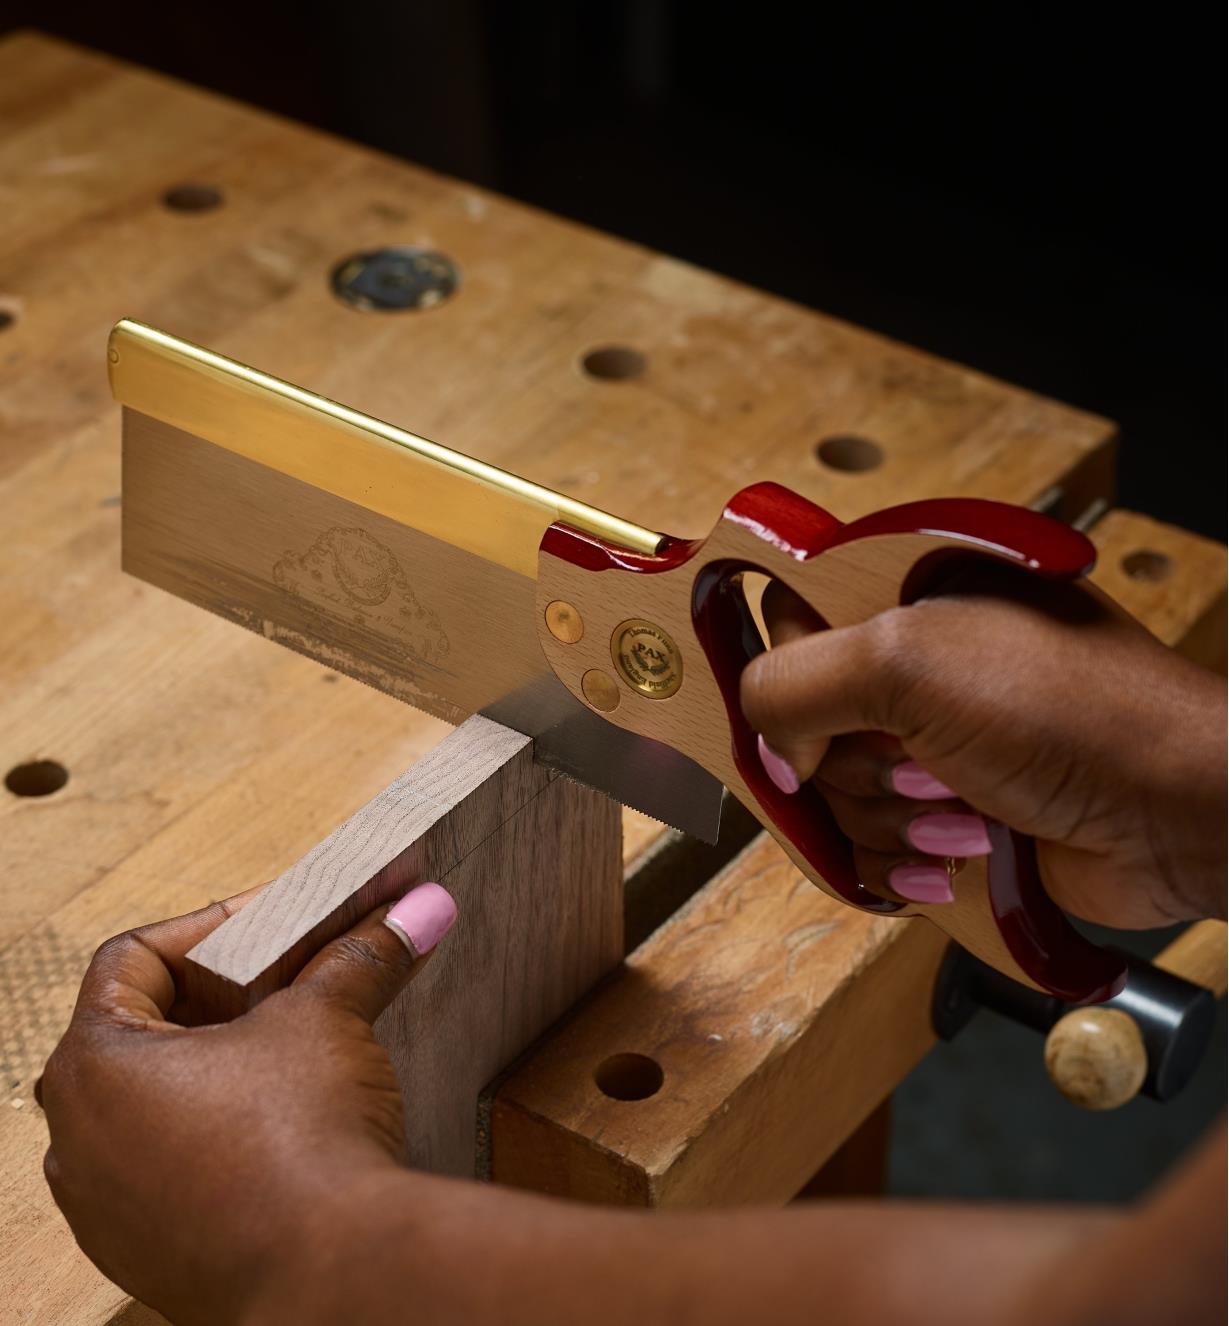 Using a dovetail saw to cut a board that is clamped in a vise